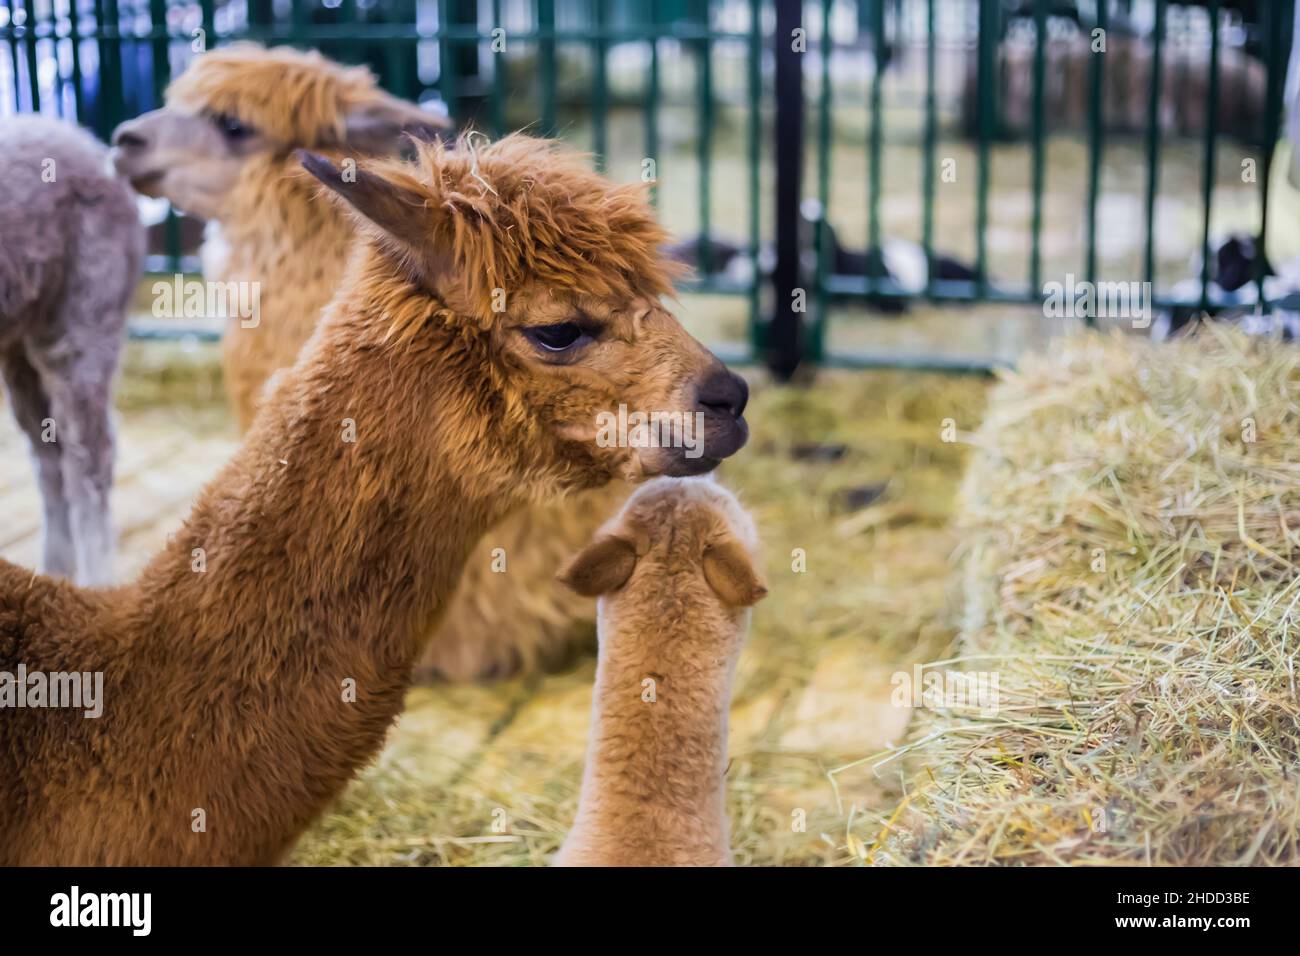 Portrait of alpaca at agricultural animal exhibition Stock Photo